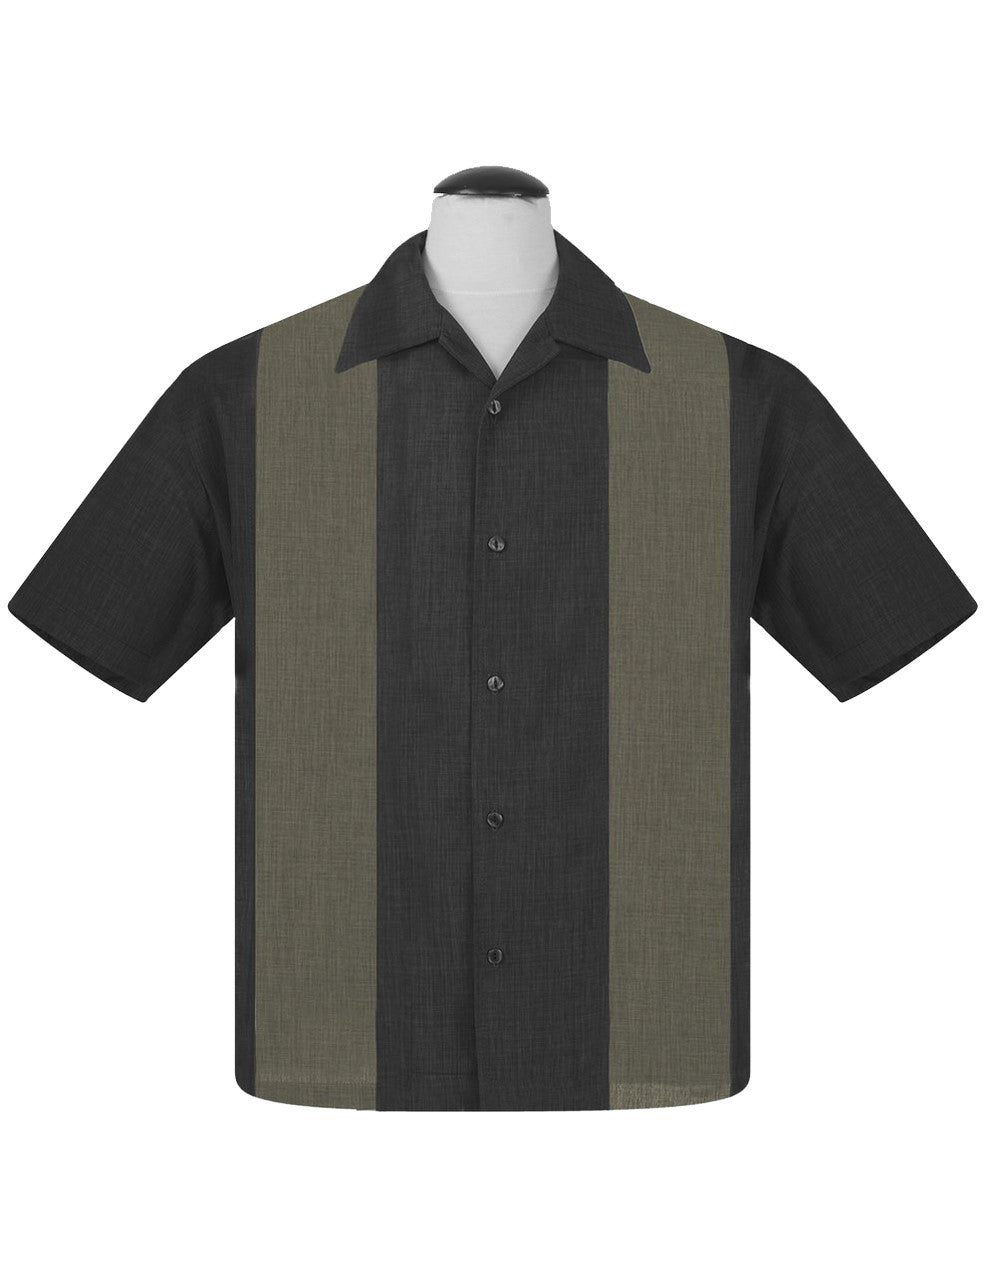 PopCheck Double Panel Bowling Shirt in Charcoal/Bamboo